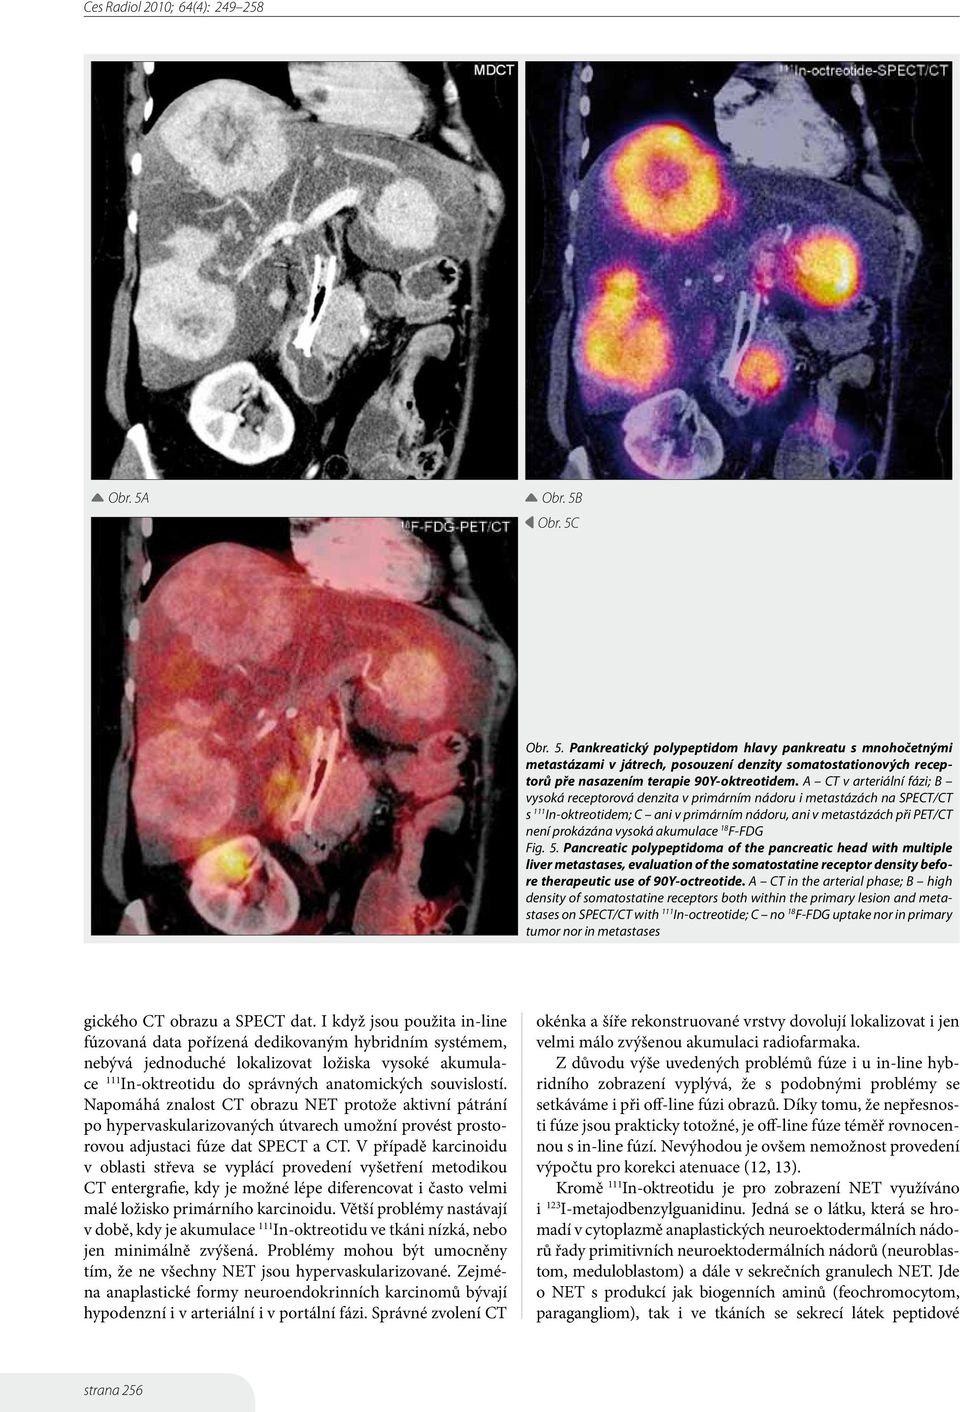 akumulace 18 F-FDG Fig. 5. Pancreatic polypeptidoma of the pancreatic head with multiple liver metastases, evaluation of the somatostatine receptor density before therapeutic use of 90Y-octreotide.